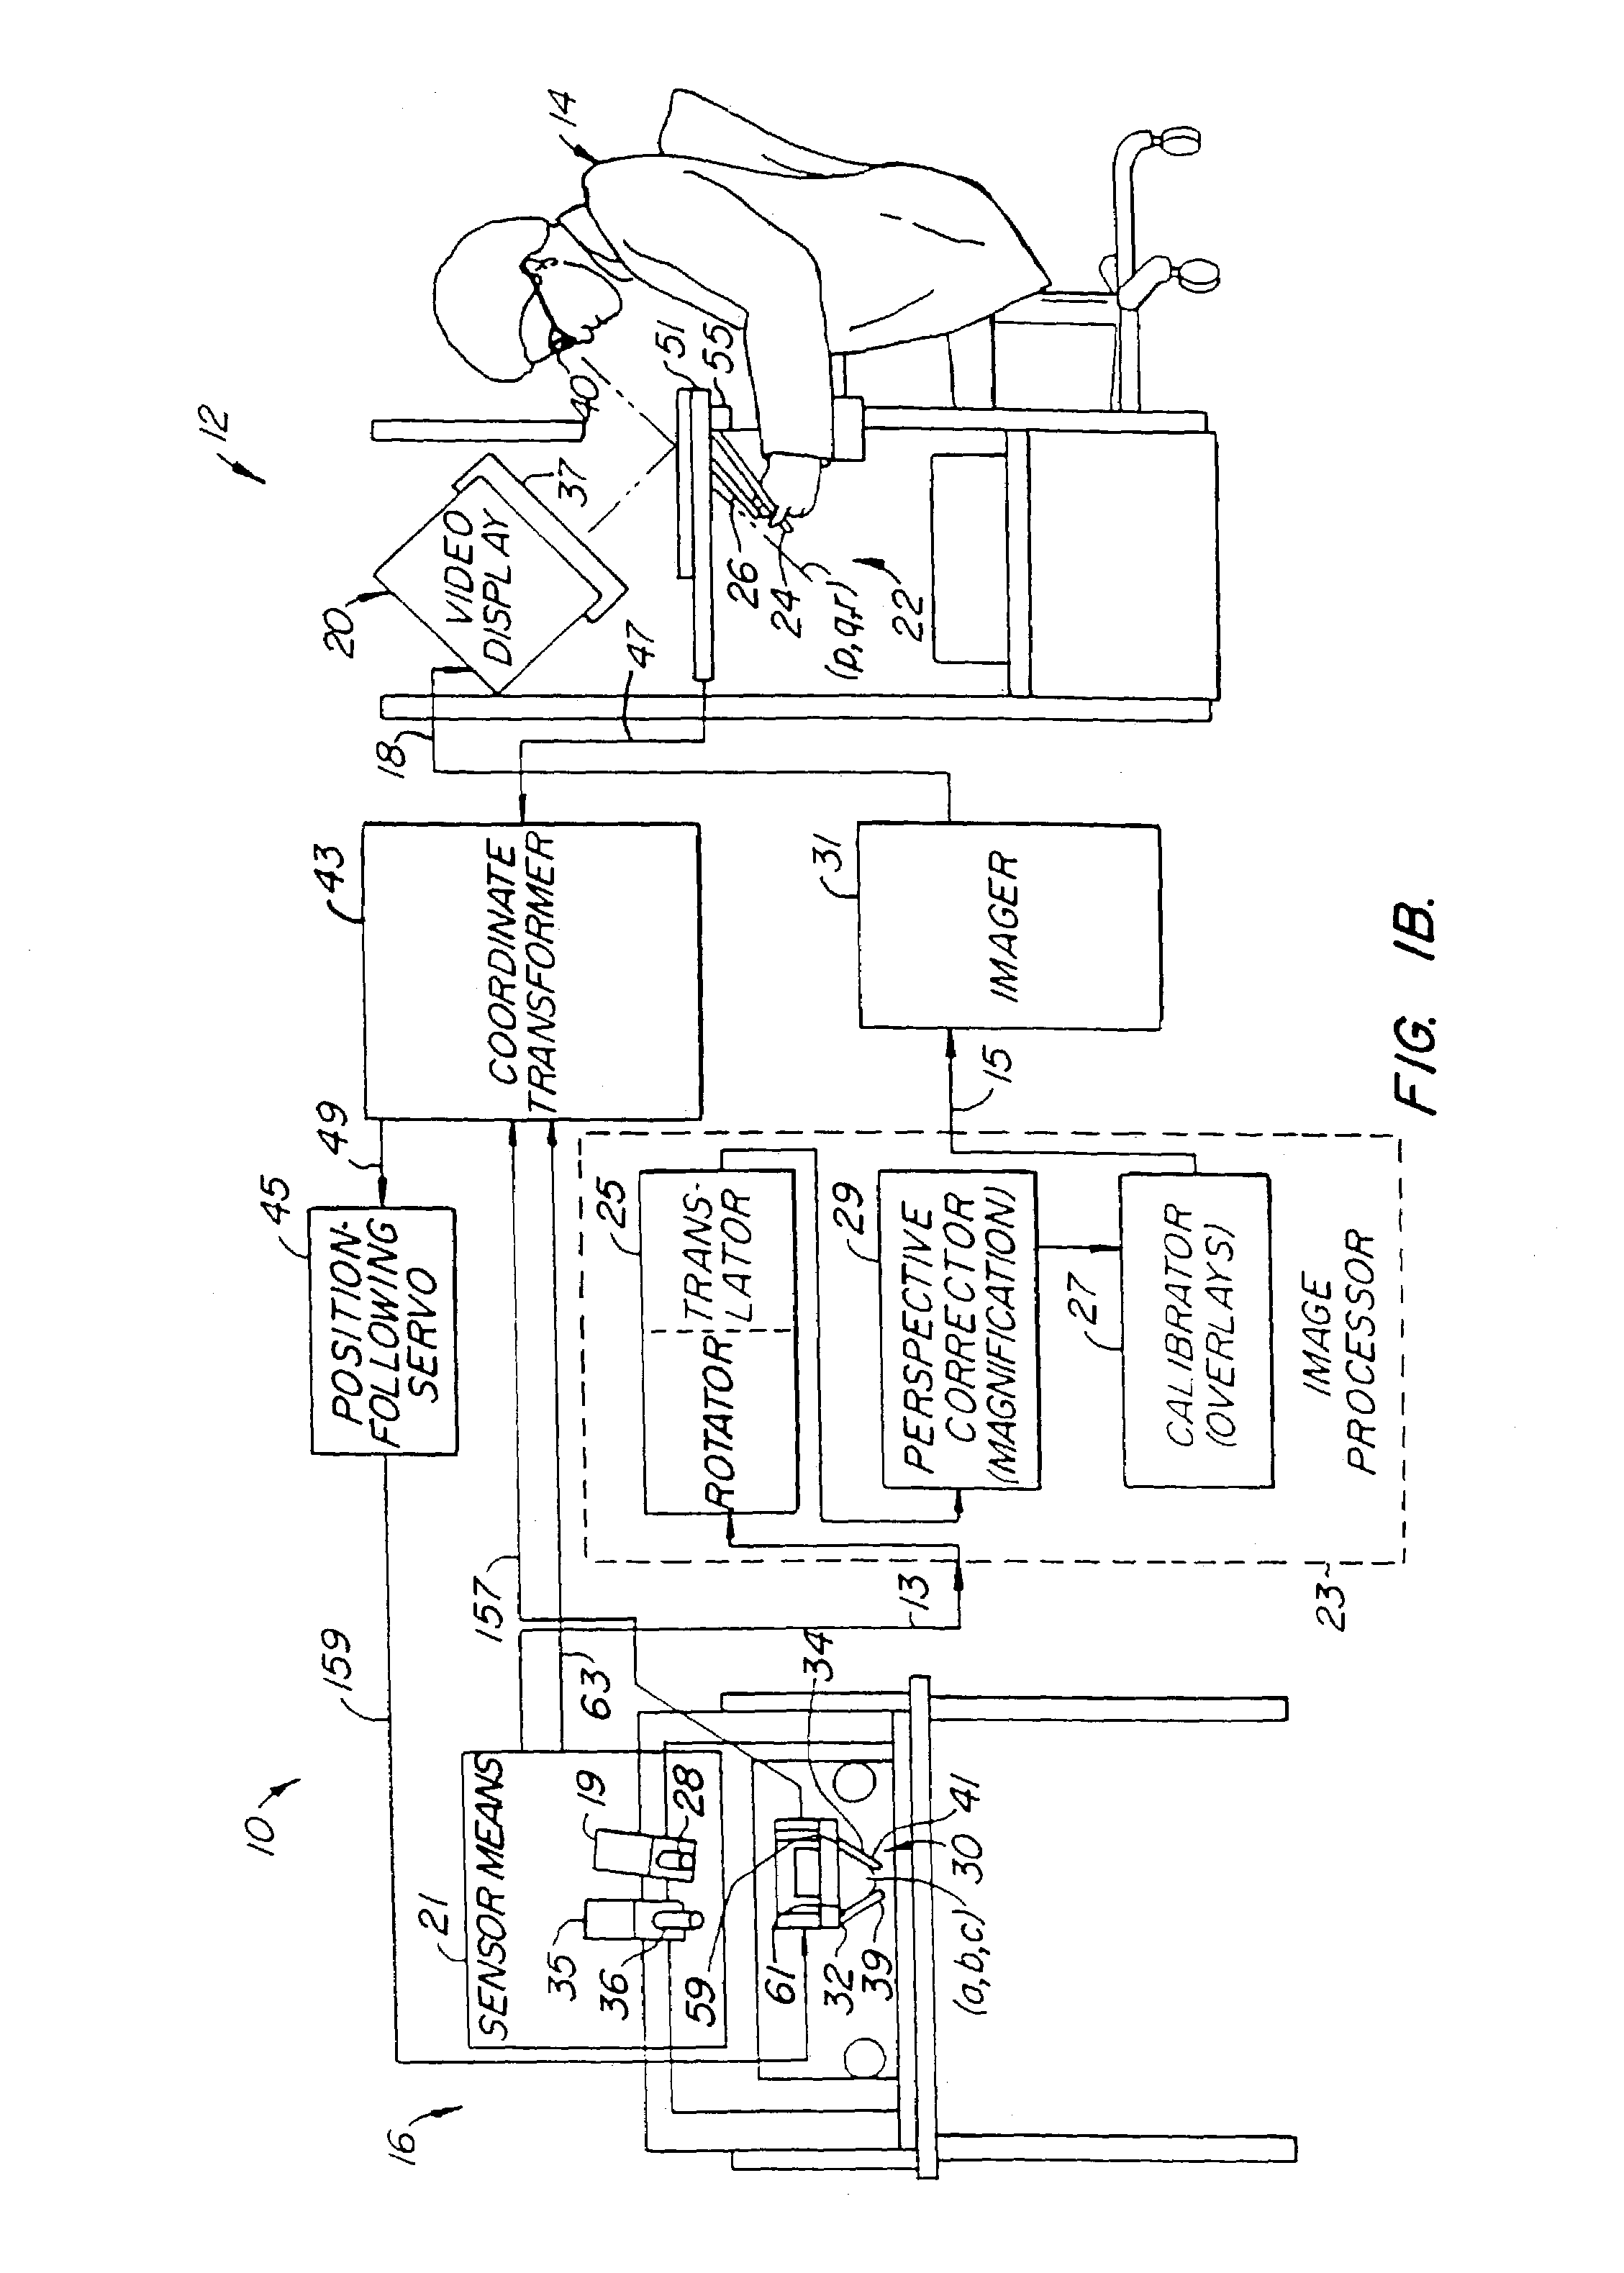 Method and apparatus for transforming coordinate systems in a telemanipulation system